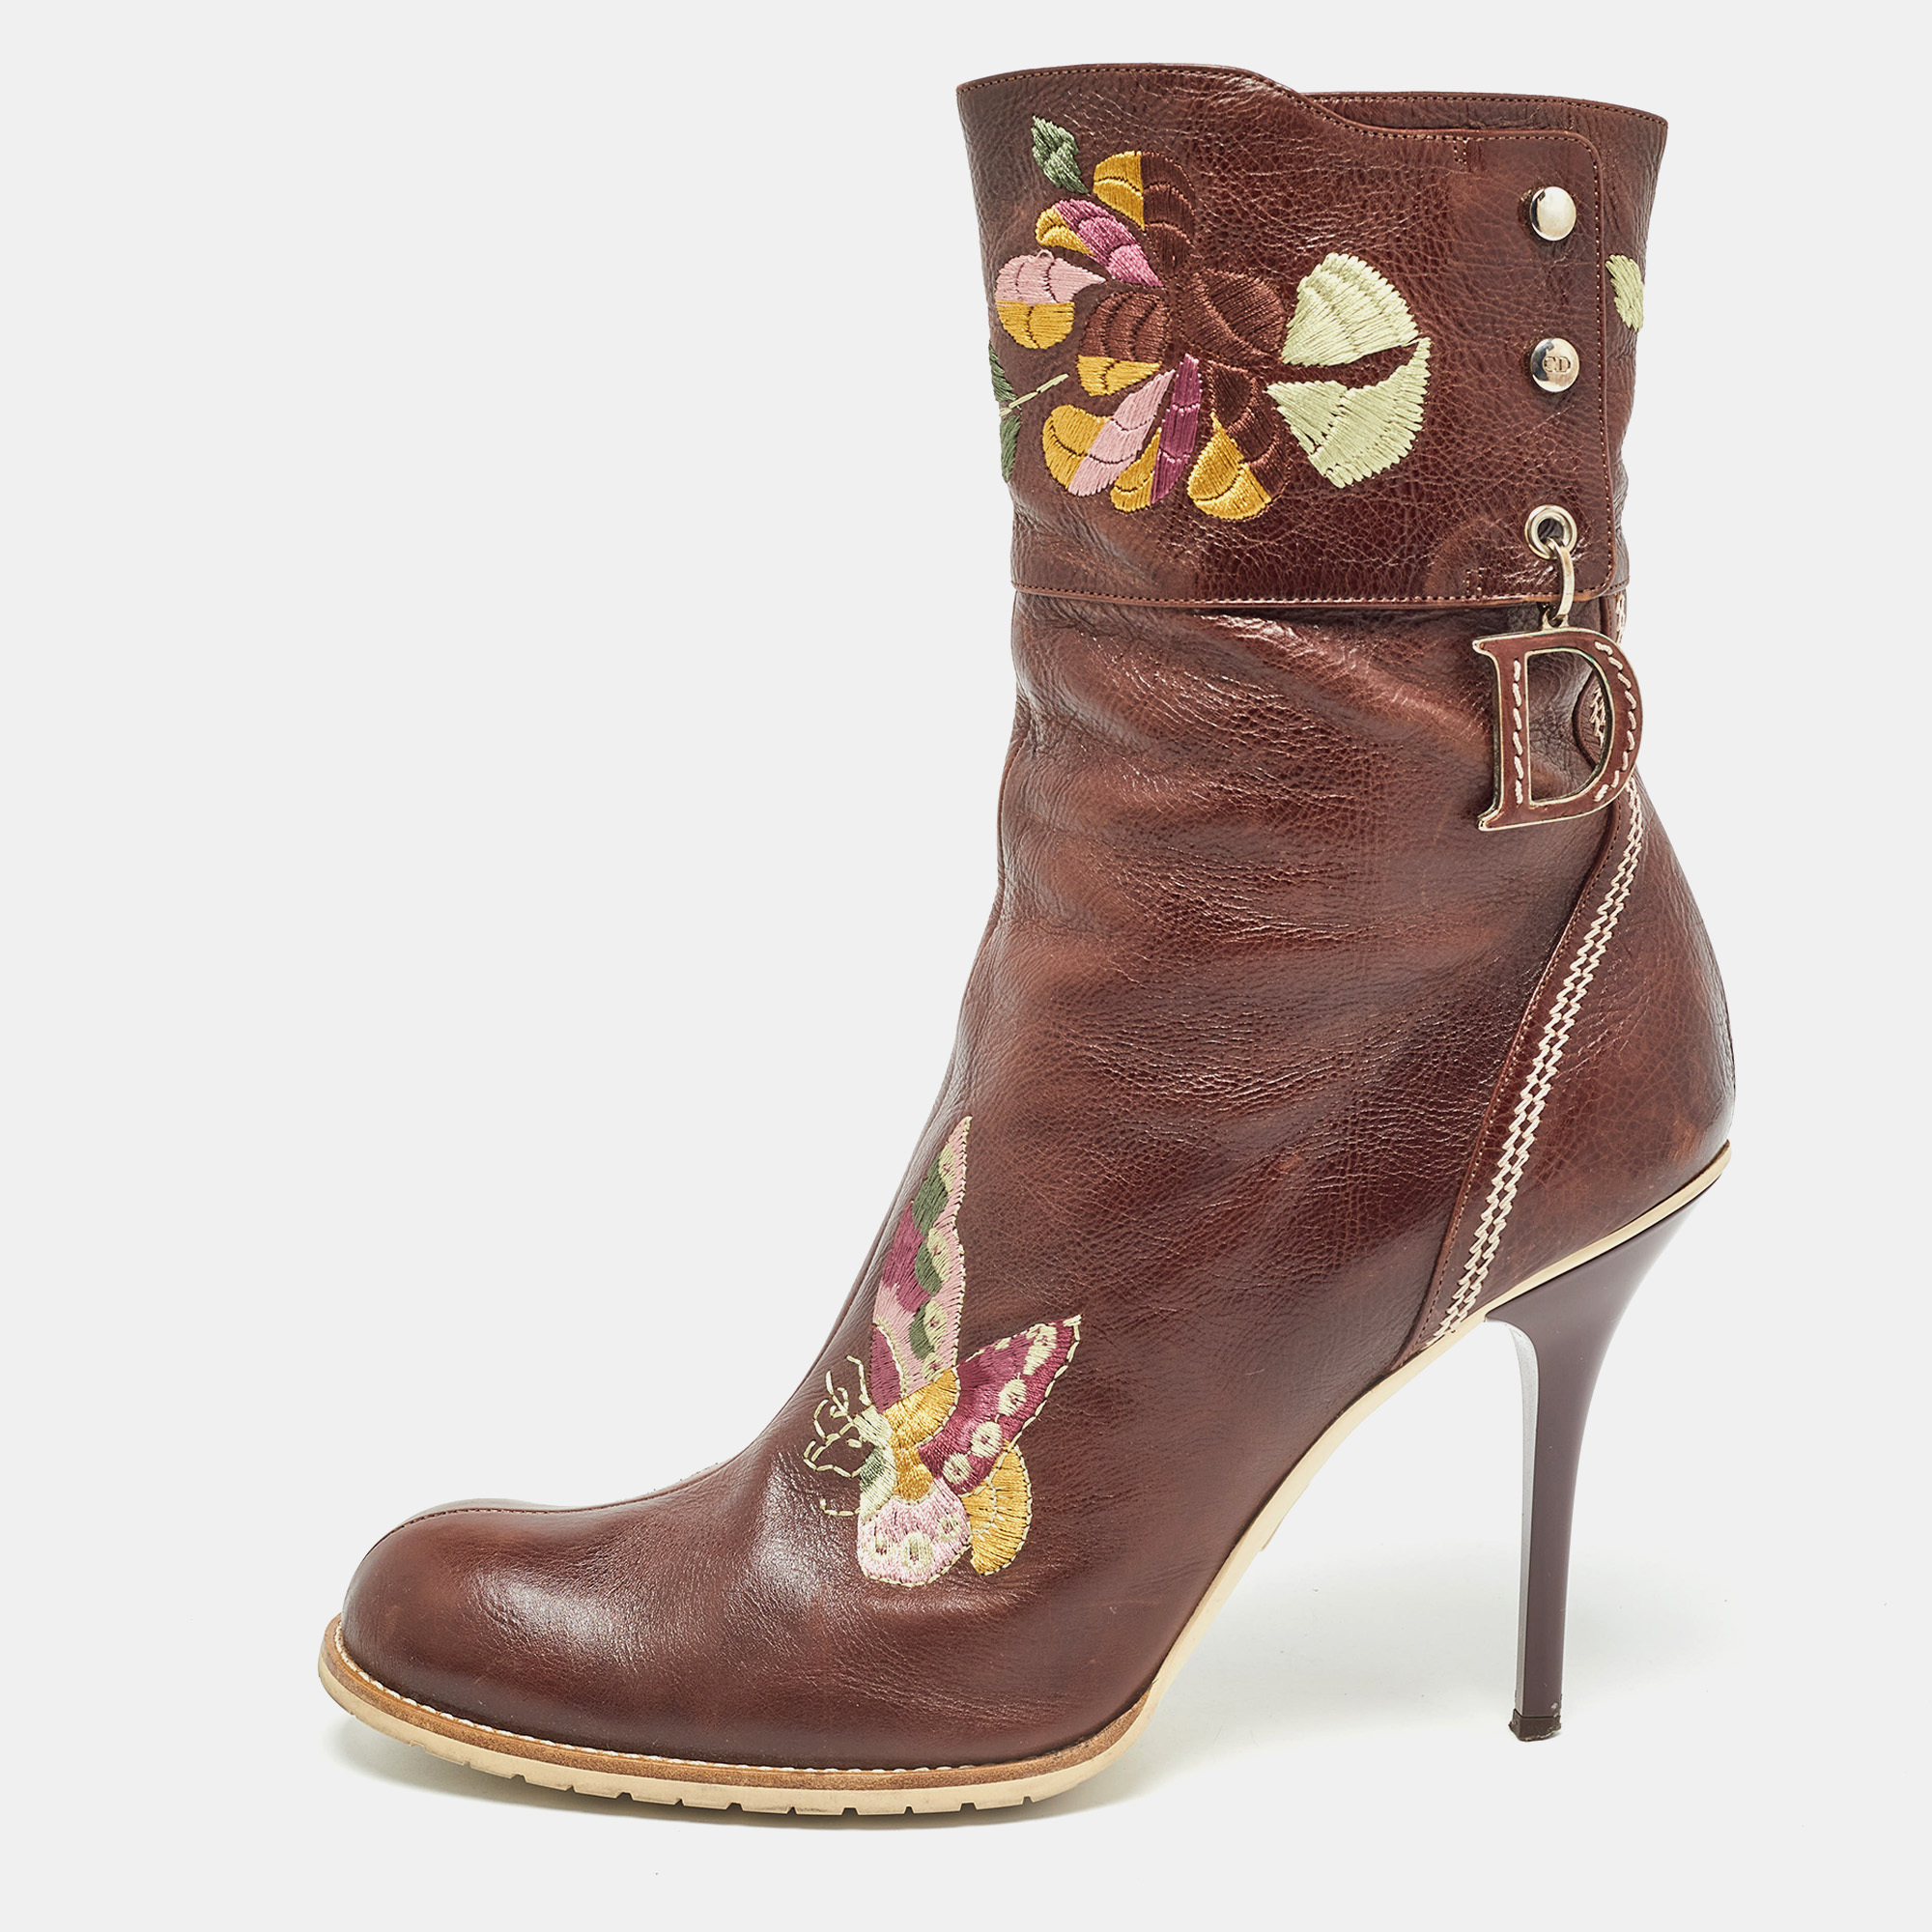 Dior brown leather flower print ankle boots size 40.5